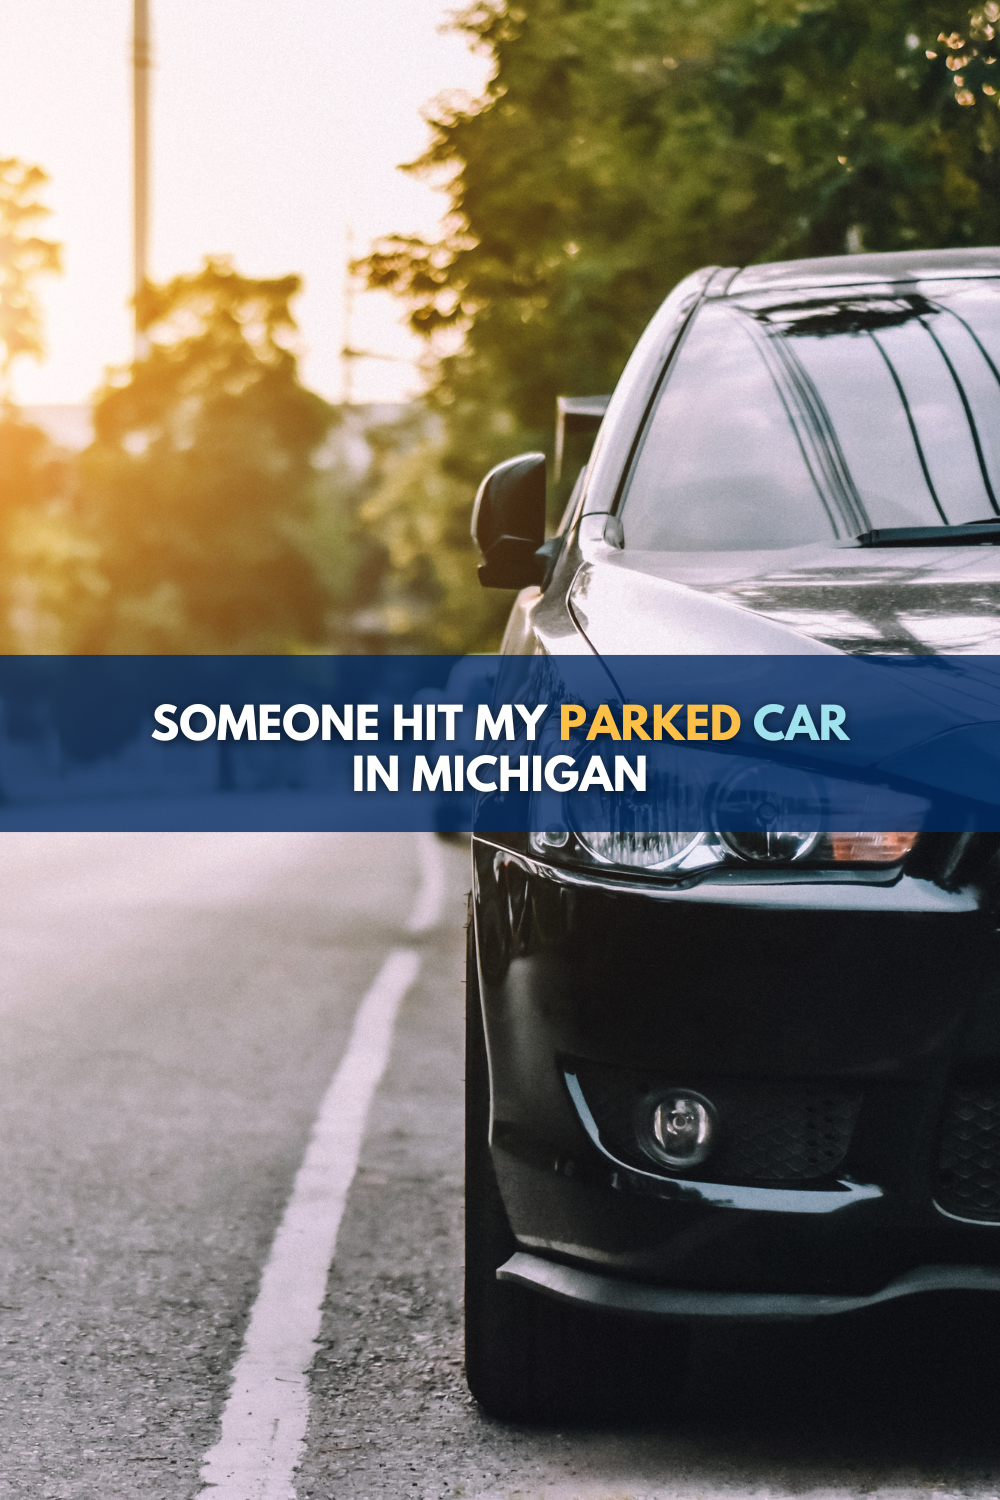 Someone Hit My Parked Car In Michigan: What You Need To Know